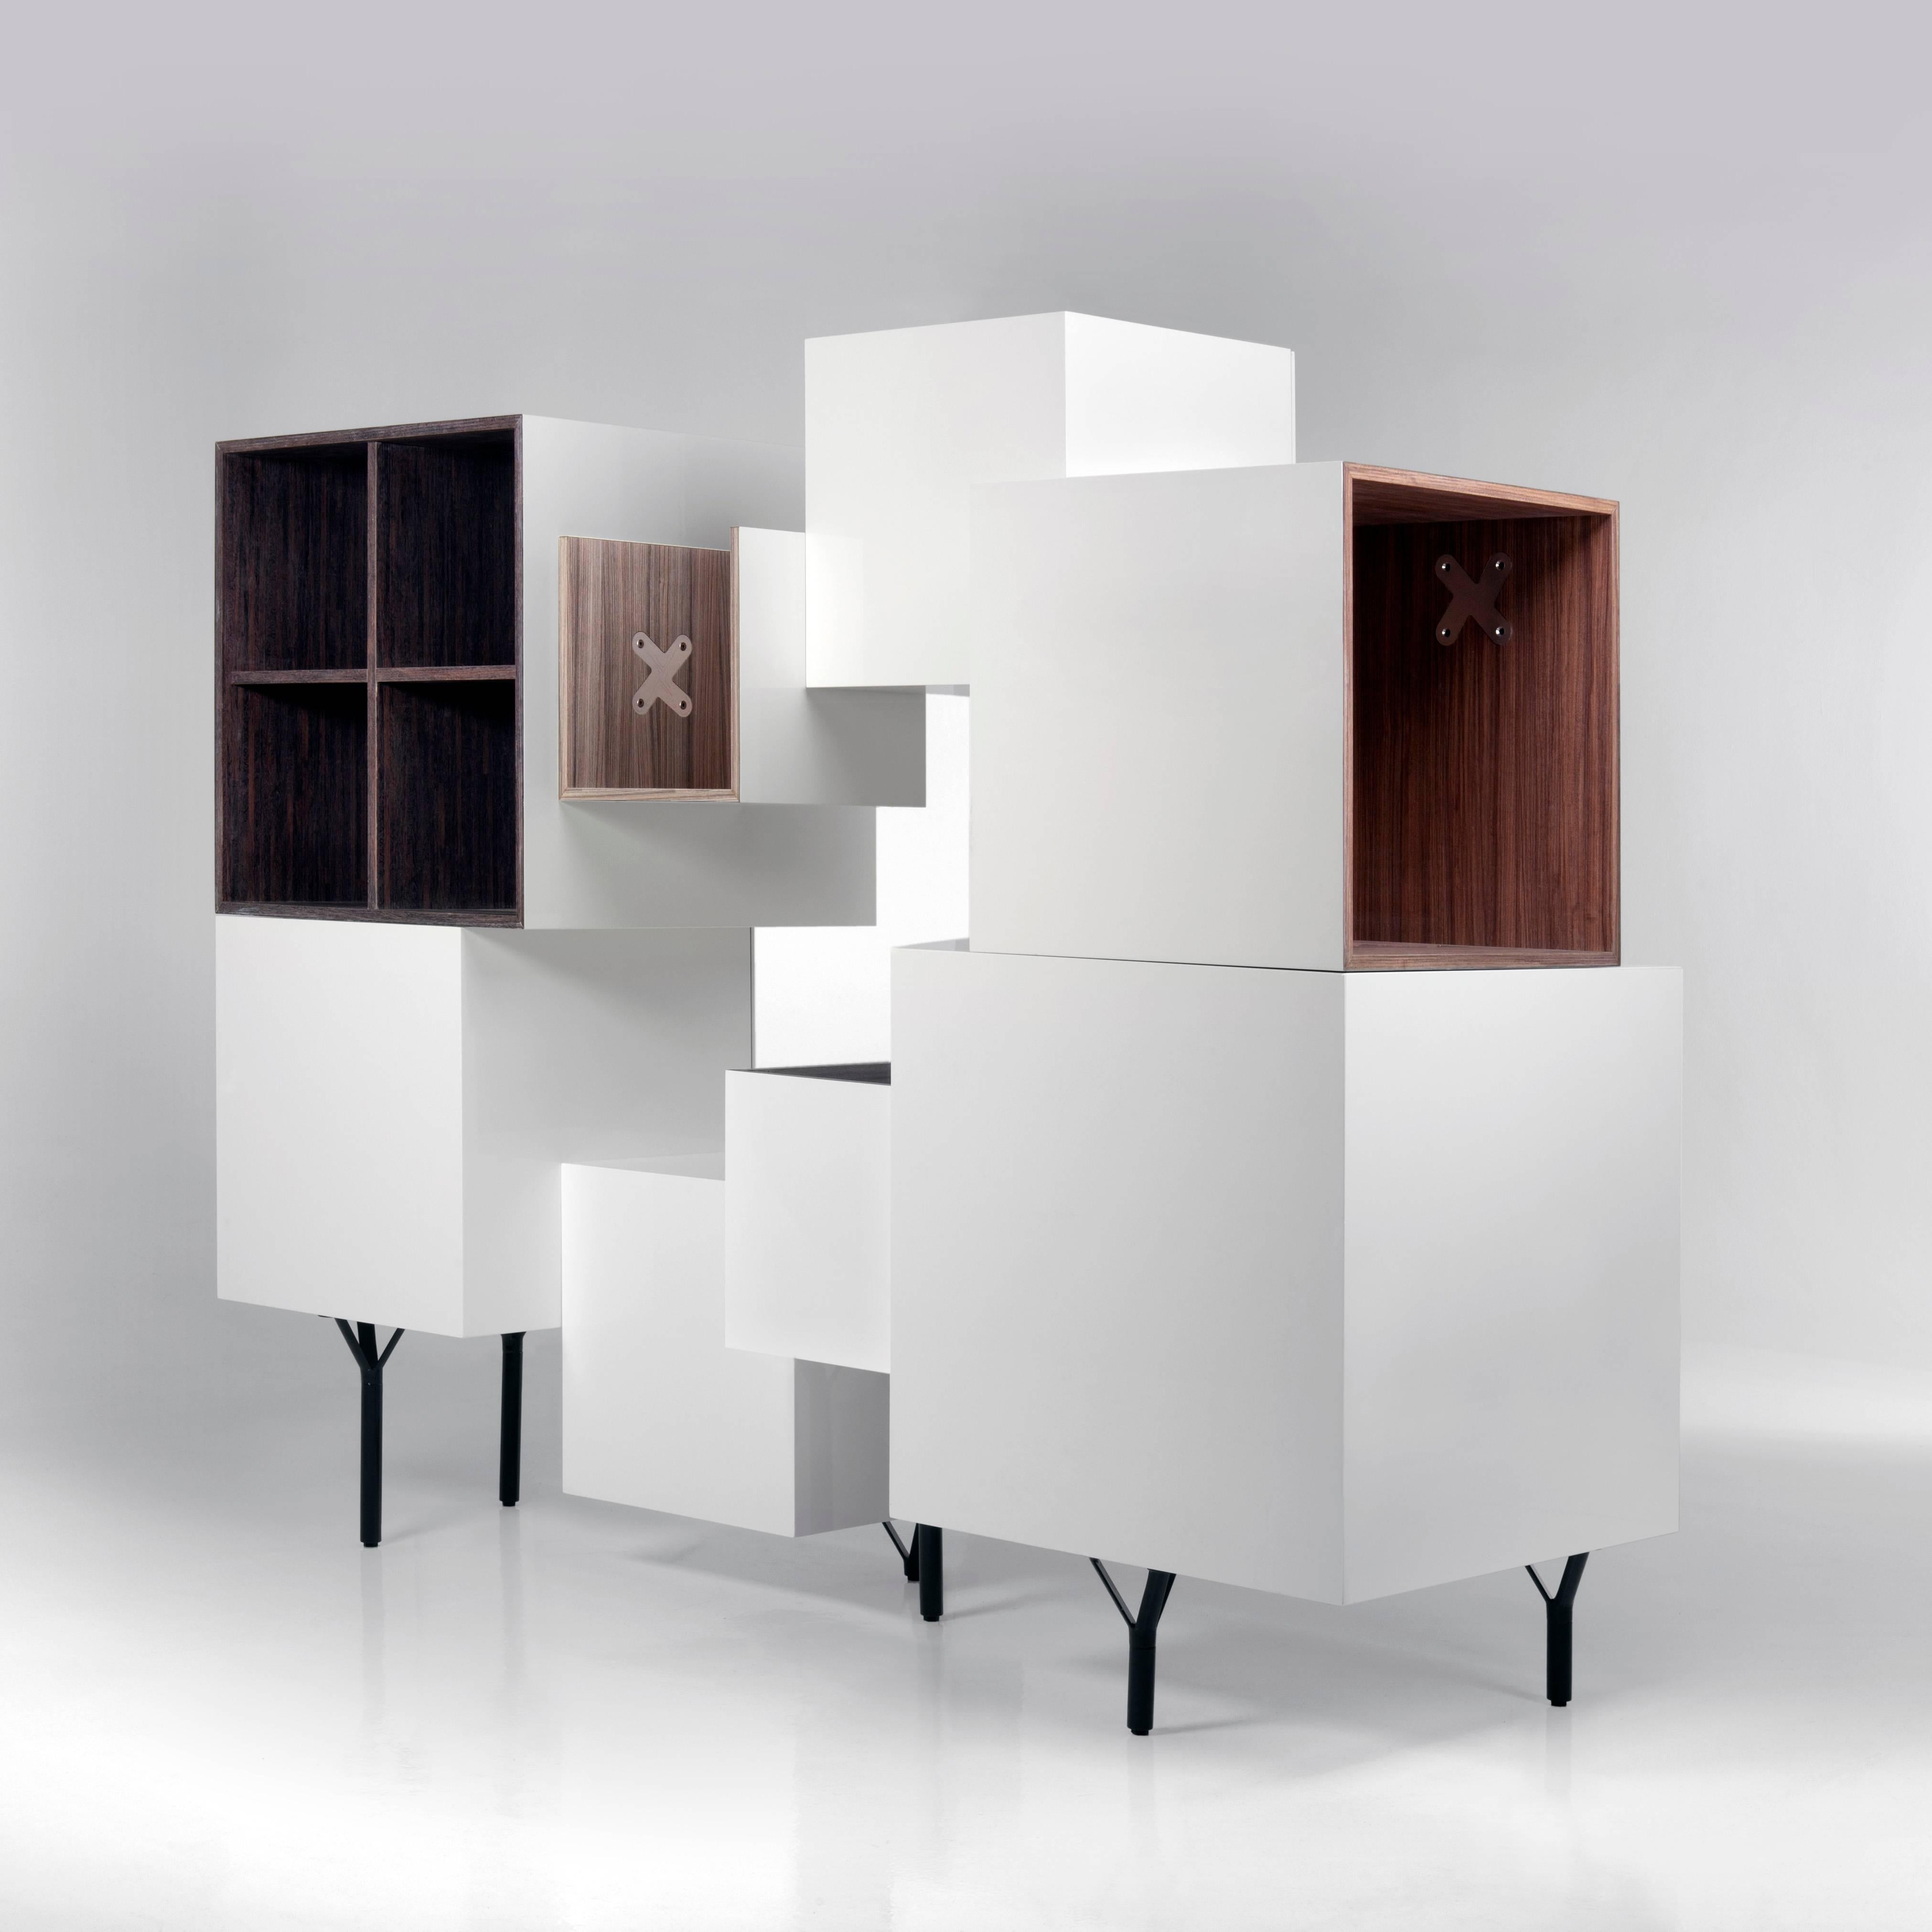 Cabinet designed by Martí Guixé in 2011 and manufactured by BD Barcelona.

This modular furniture is made of container cubes with various functions. They are dynamic both in their volume and in their positioning and finish. The woods, all